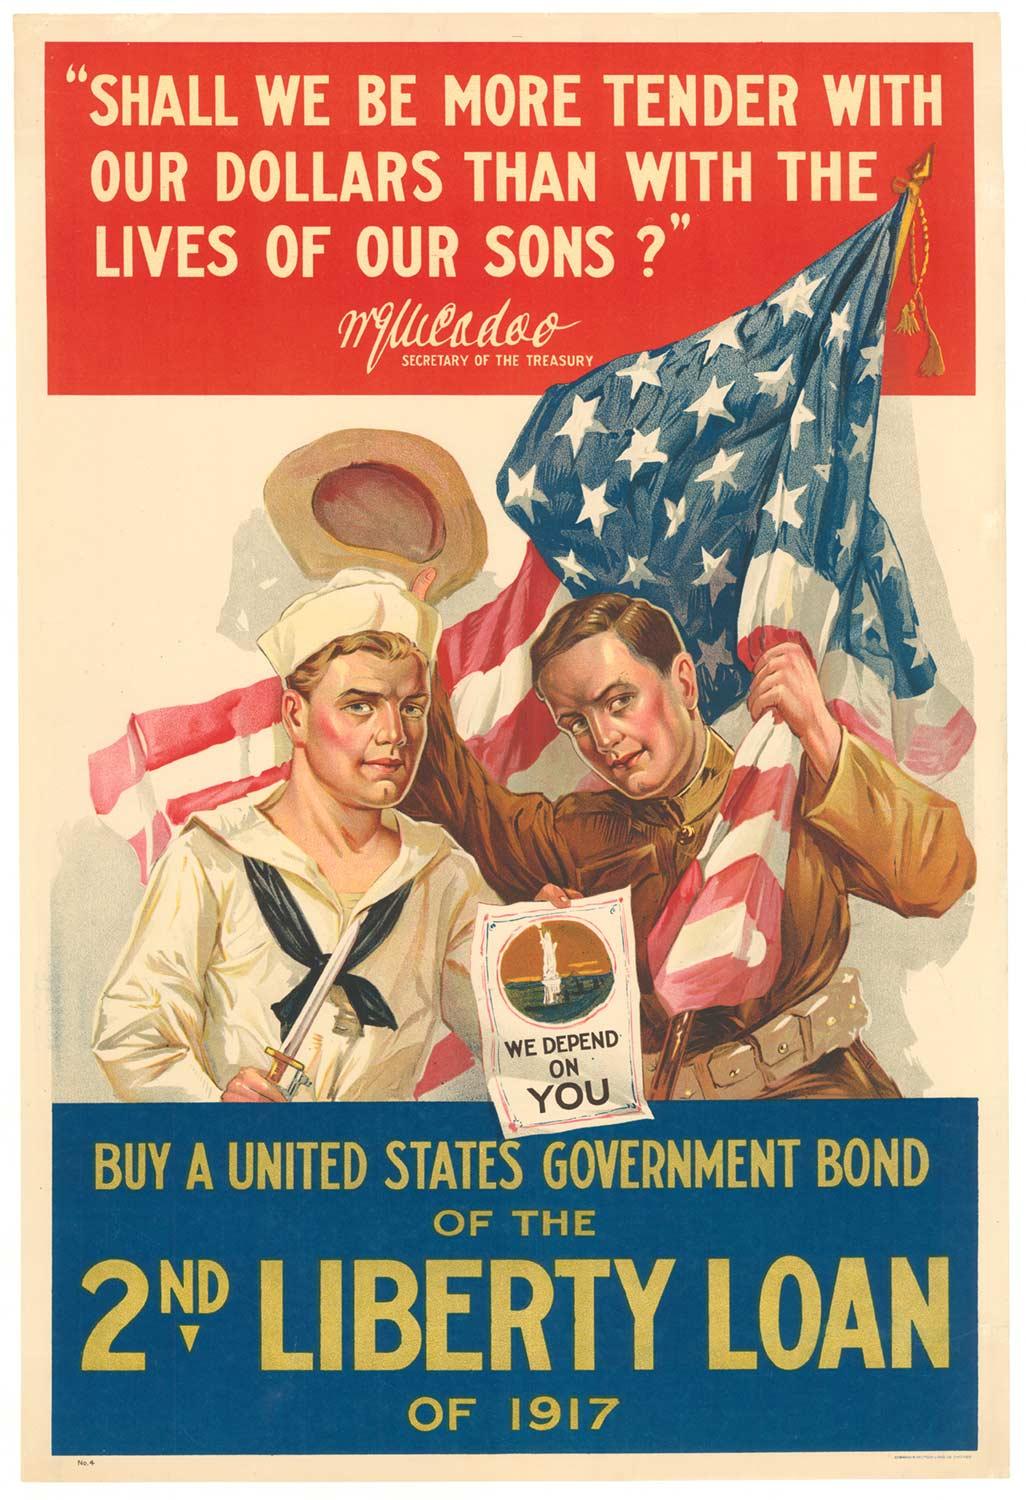 Unknown Print - Original 2nd Liberty Loan of 1917 vintage poster